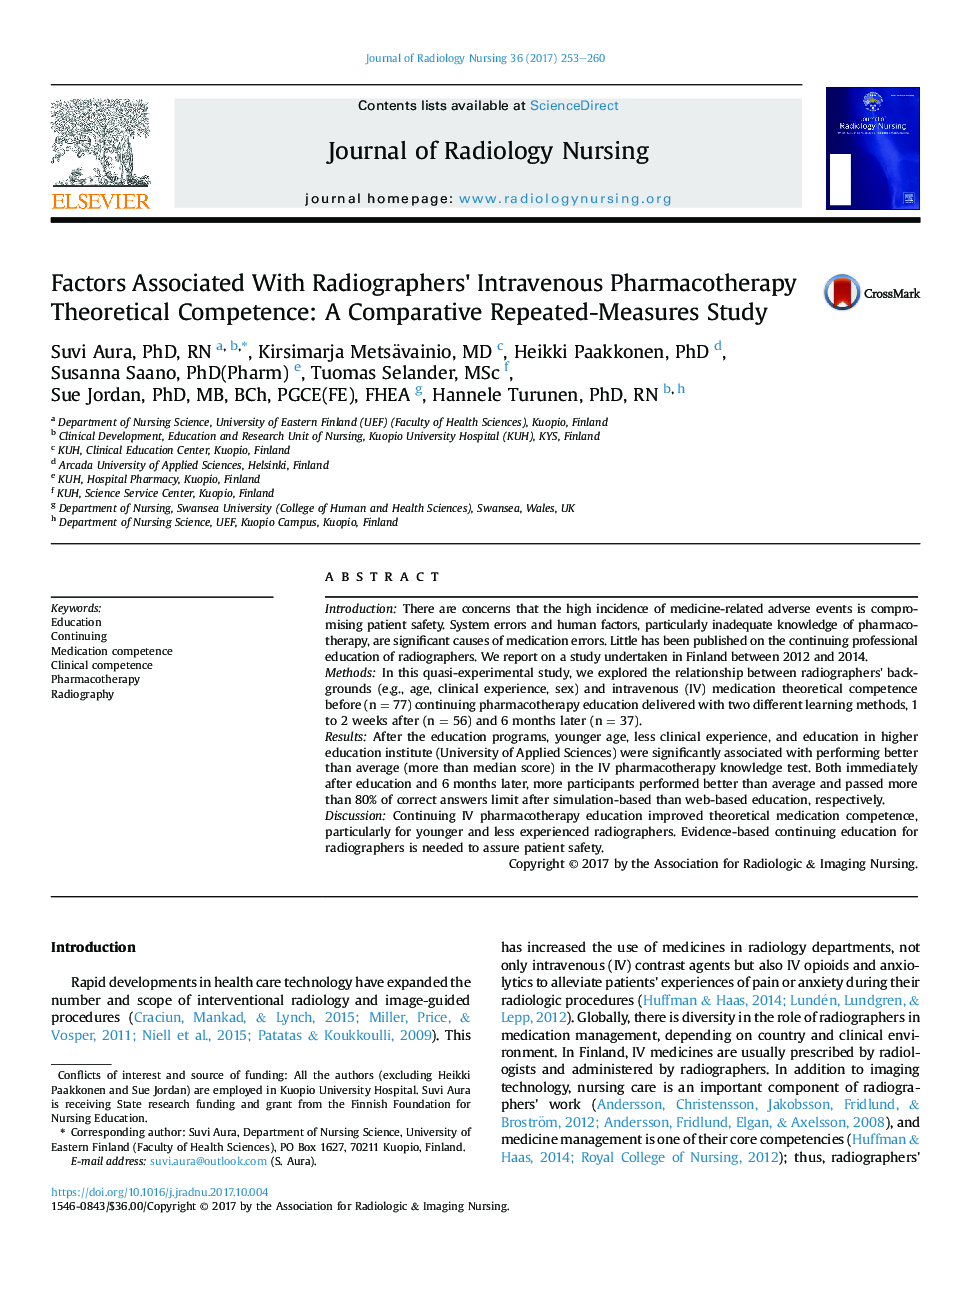 Factors Associated With Radiographers' Intravenous Pharmacotherapy Theoretical Competence: A Comparative Repeated-Measures Study